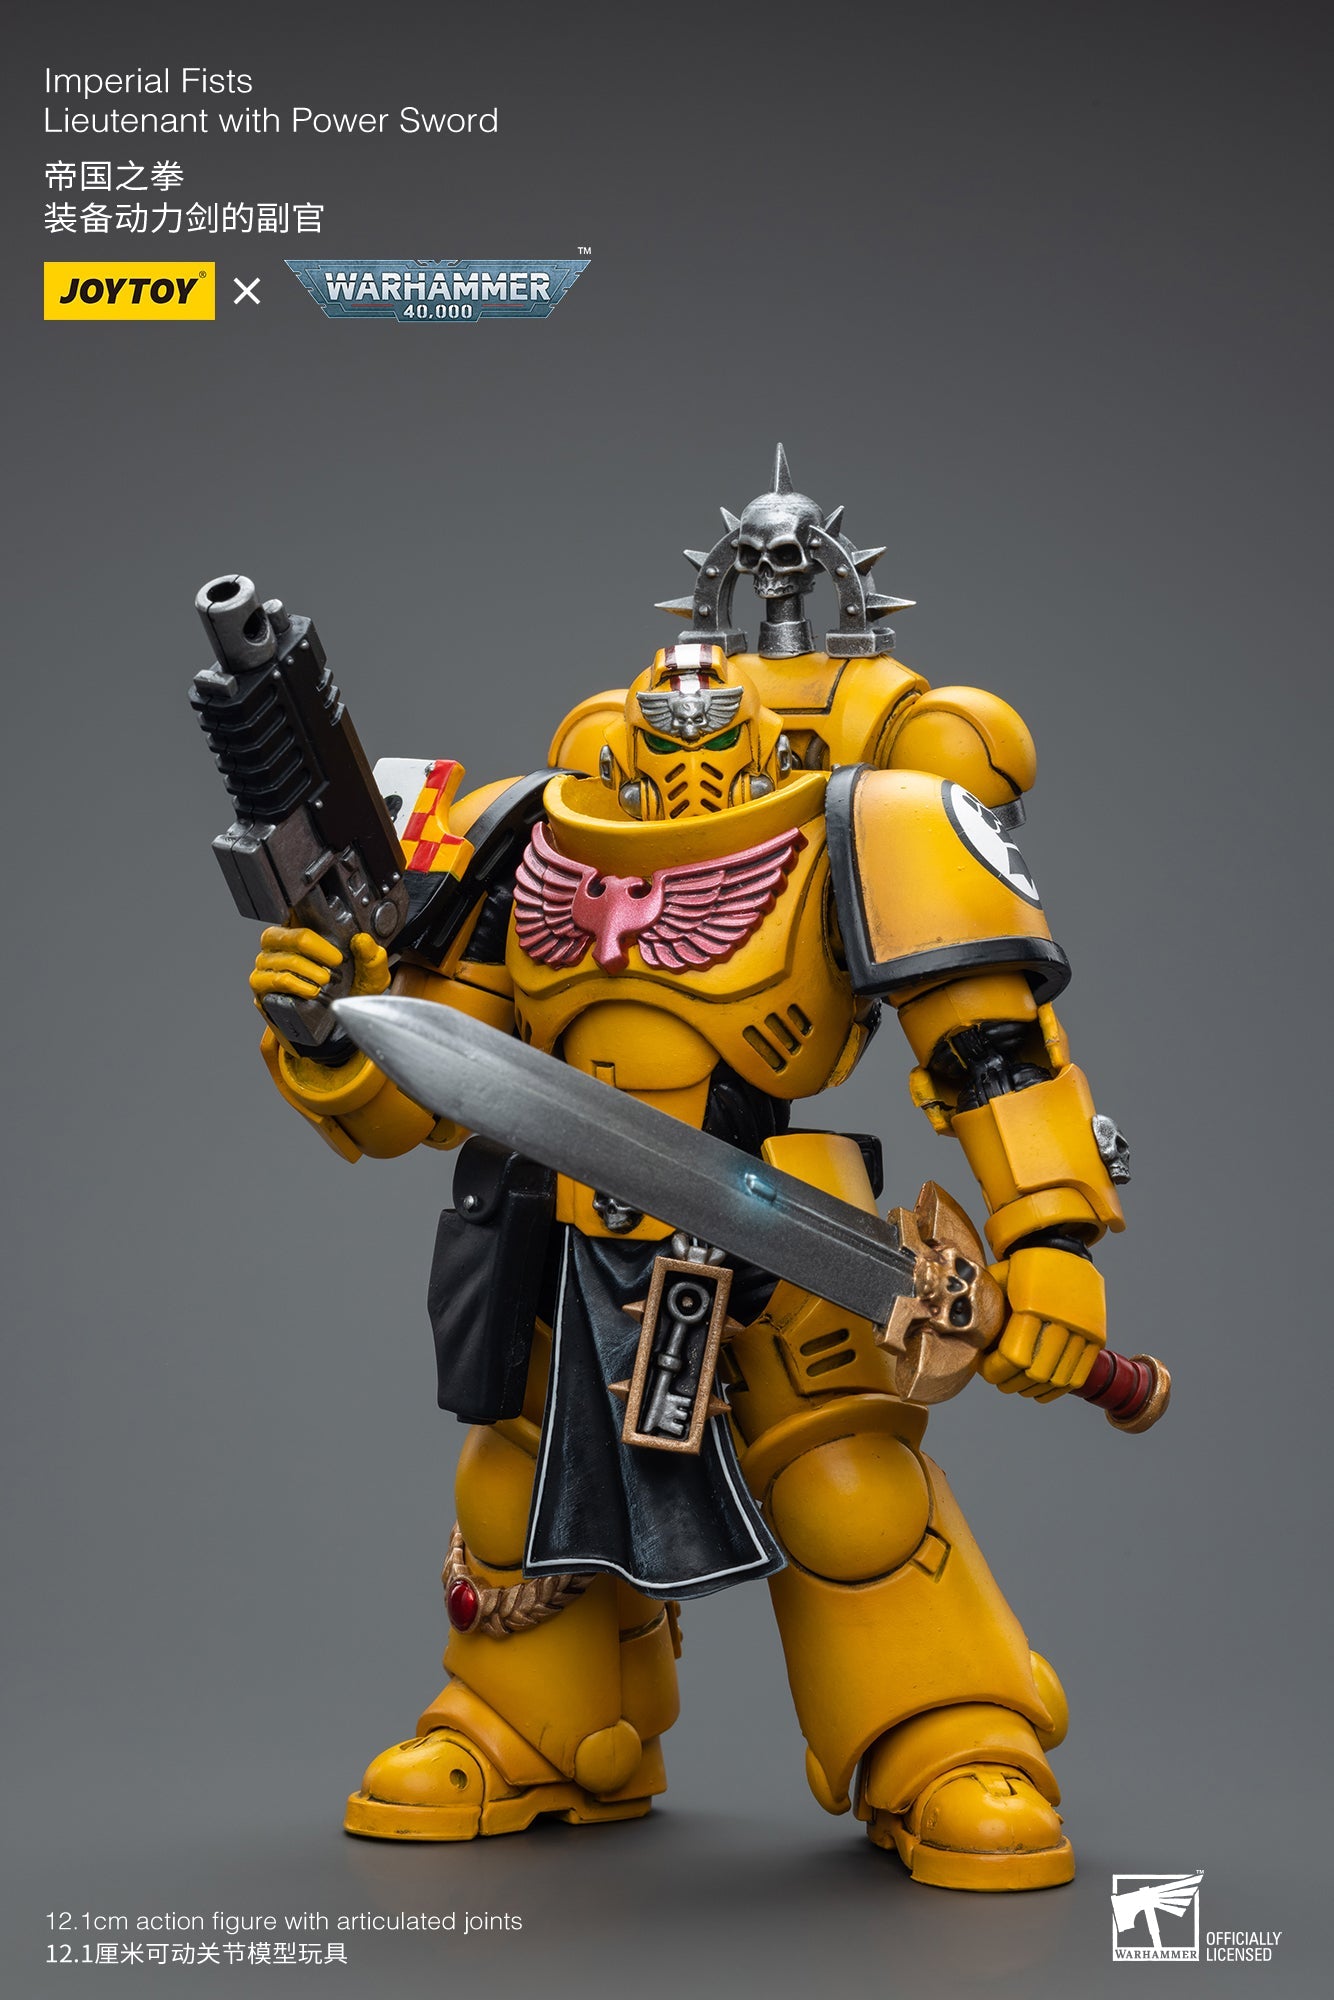 Imperial Fists Lieutenant with Power Sword - Warhammer 40K Action Figure By JOYTOY